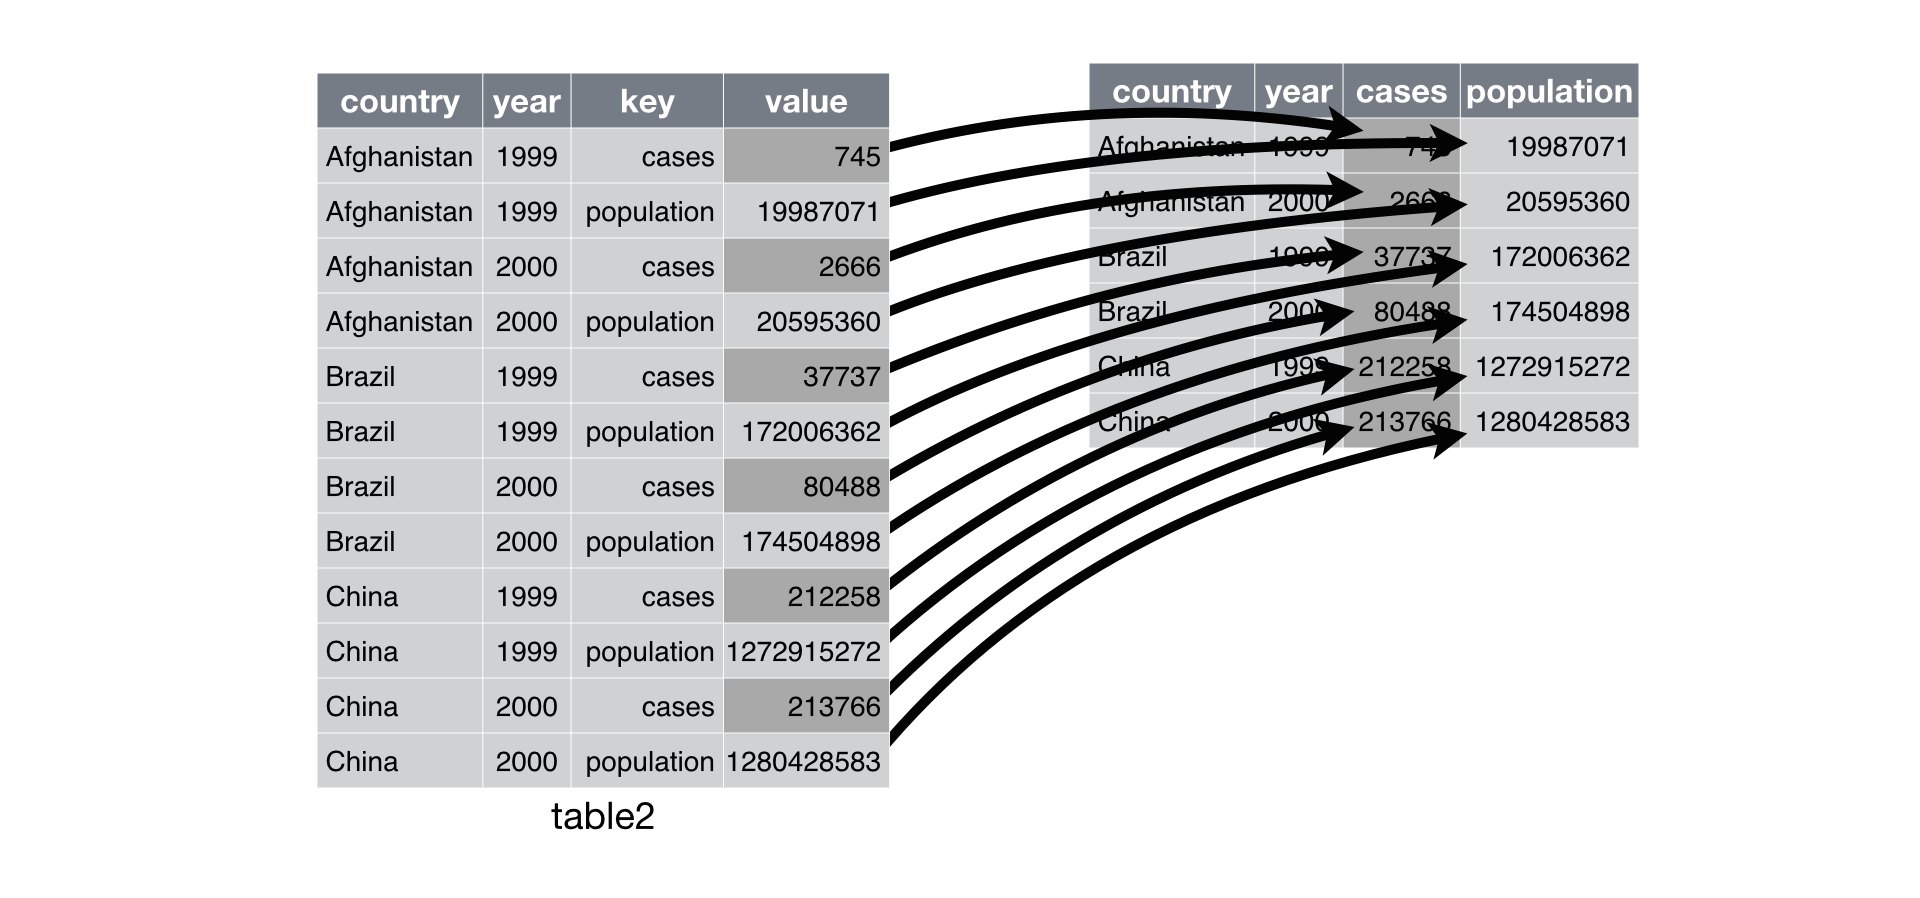 Pivoting `table2` into a "wider", tidy form.